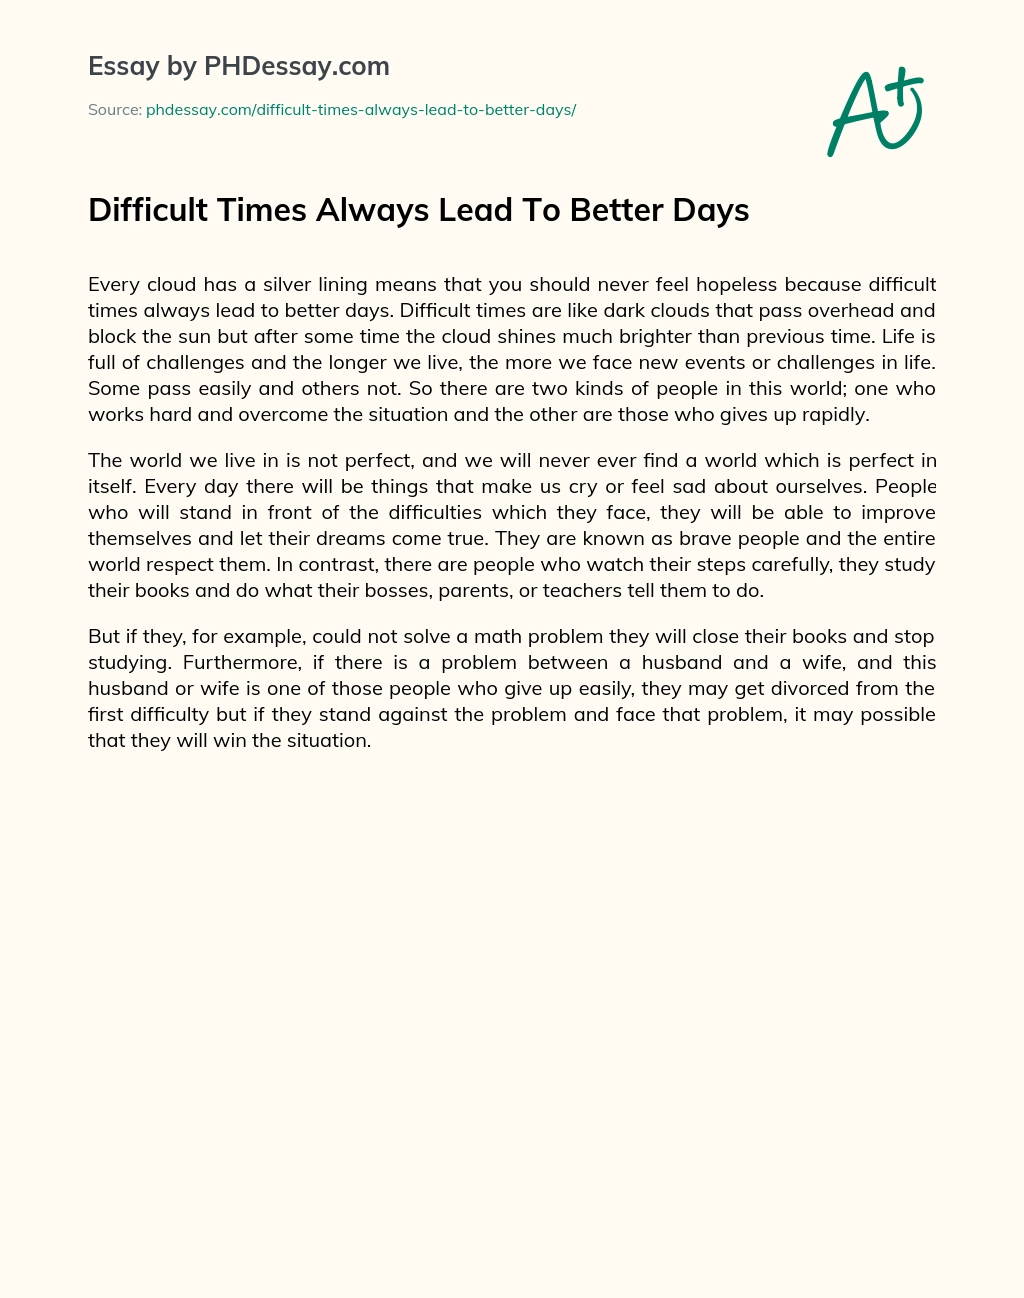 Difficult Times Always Lead To Better Days essay